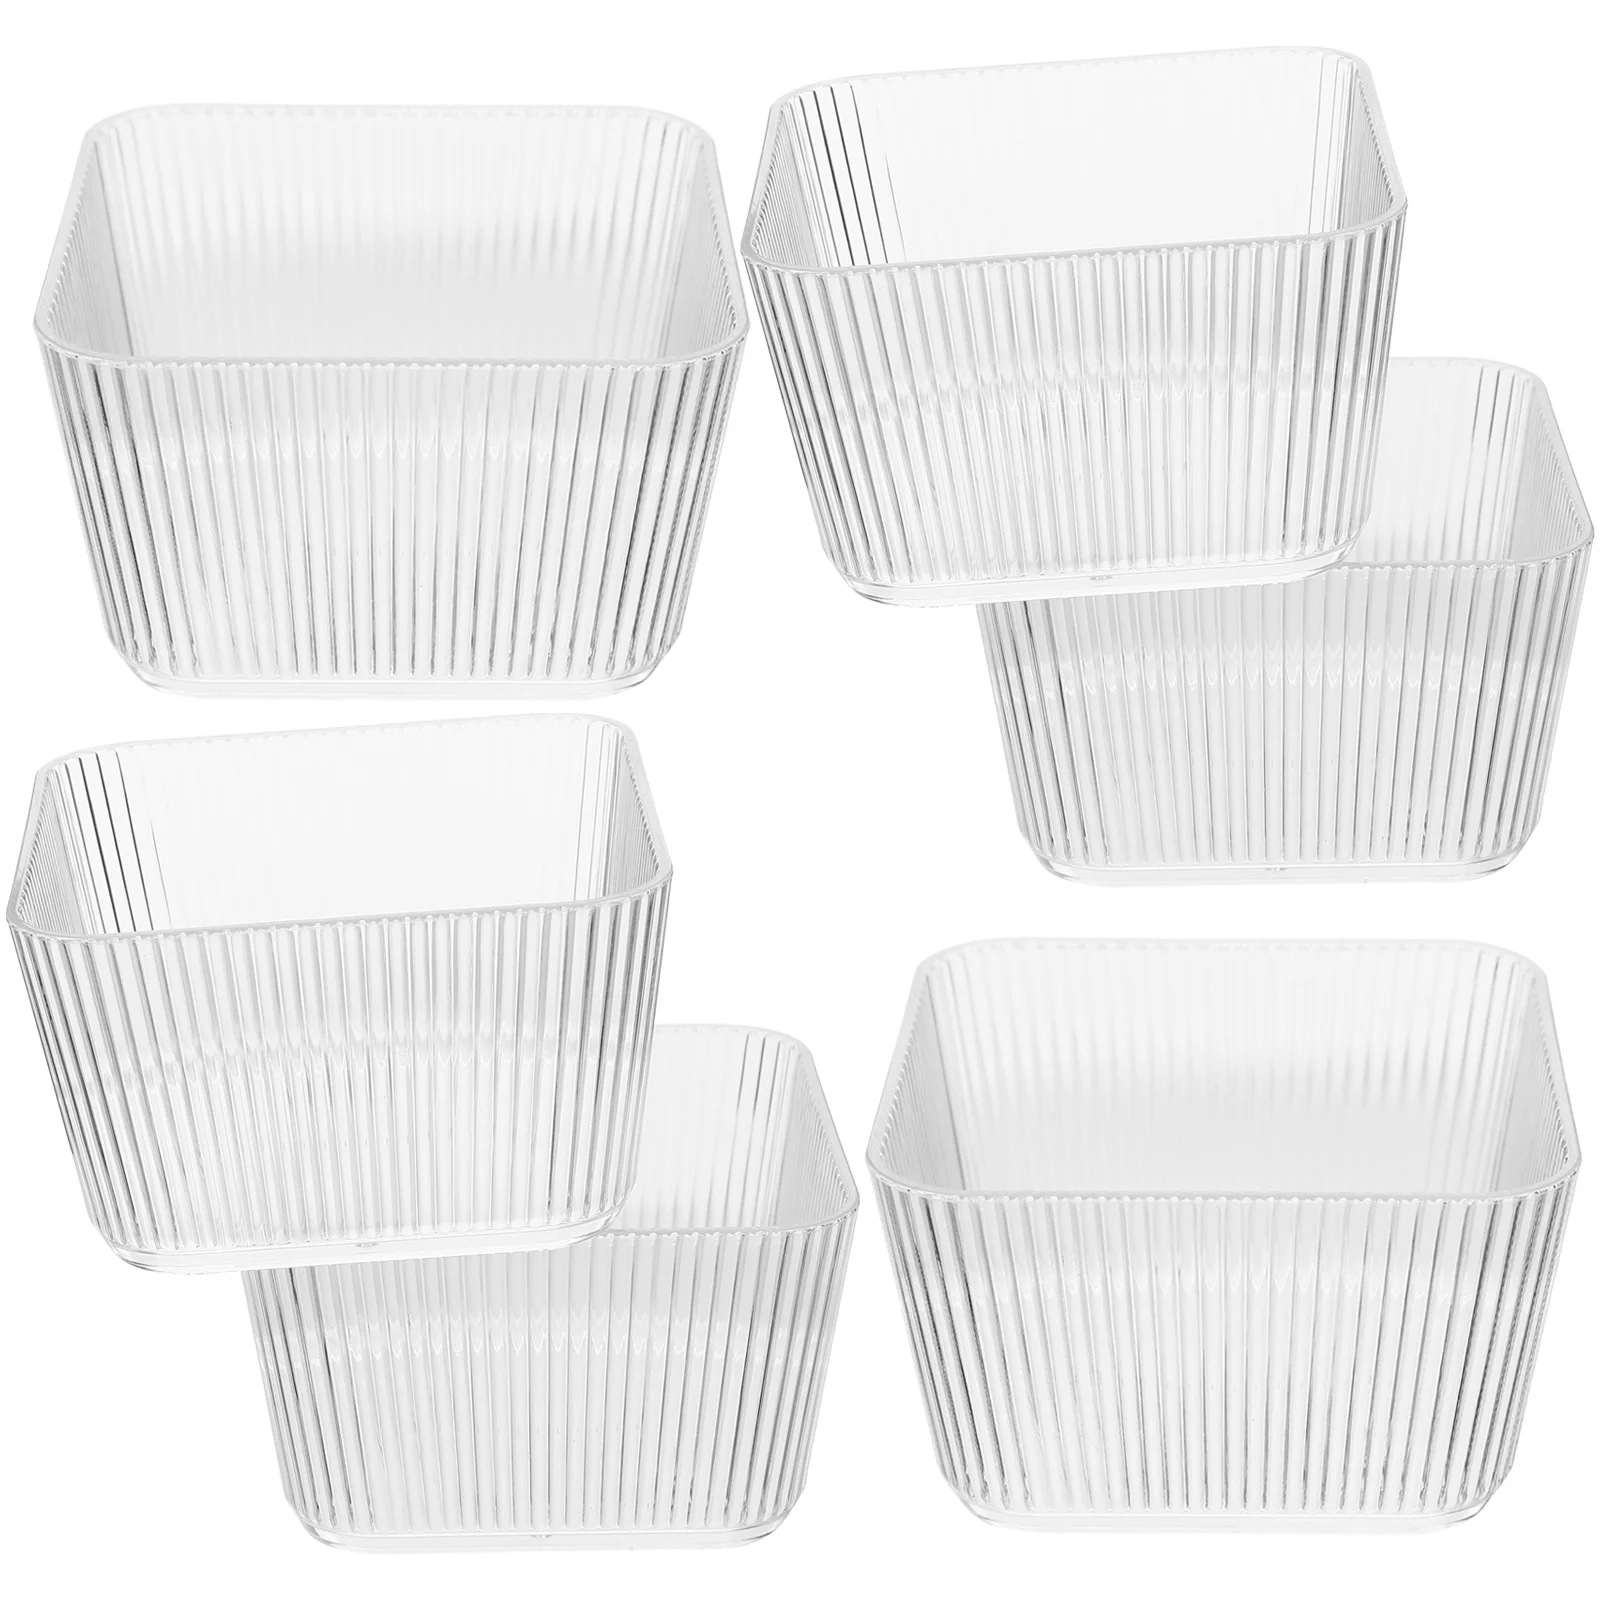 

Bowl Bowls Serving Fruit Clear Dish Snack Salad Appetizer Pasta Plate Dessert Candy Prep Cup Trifle Tray Cereal Side Mixing